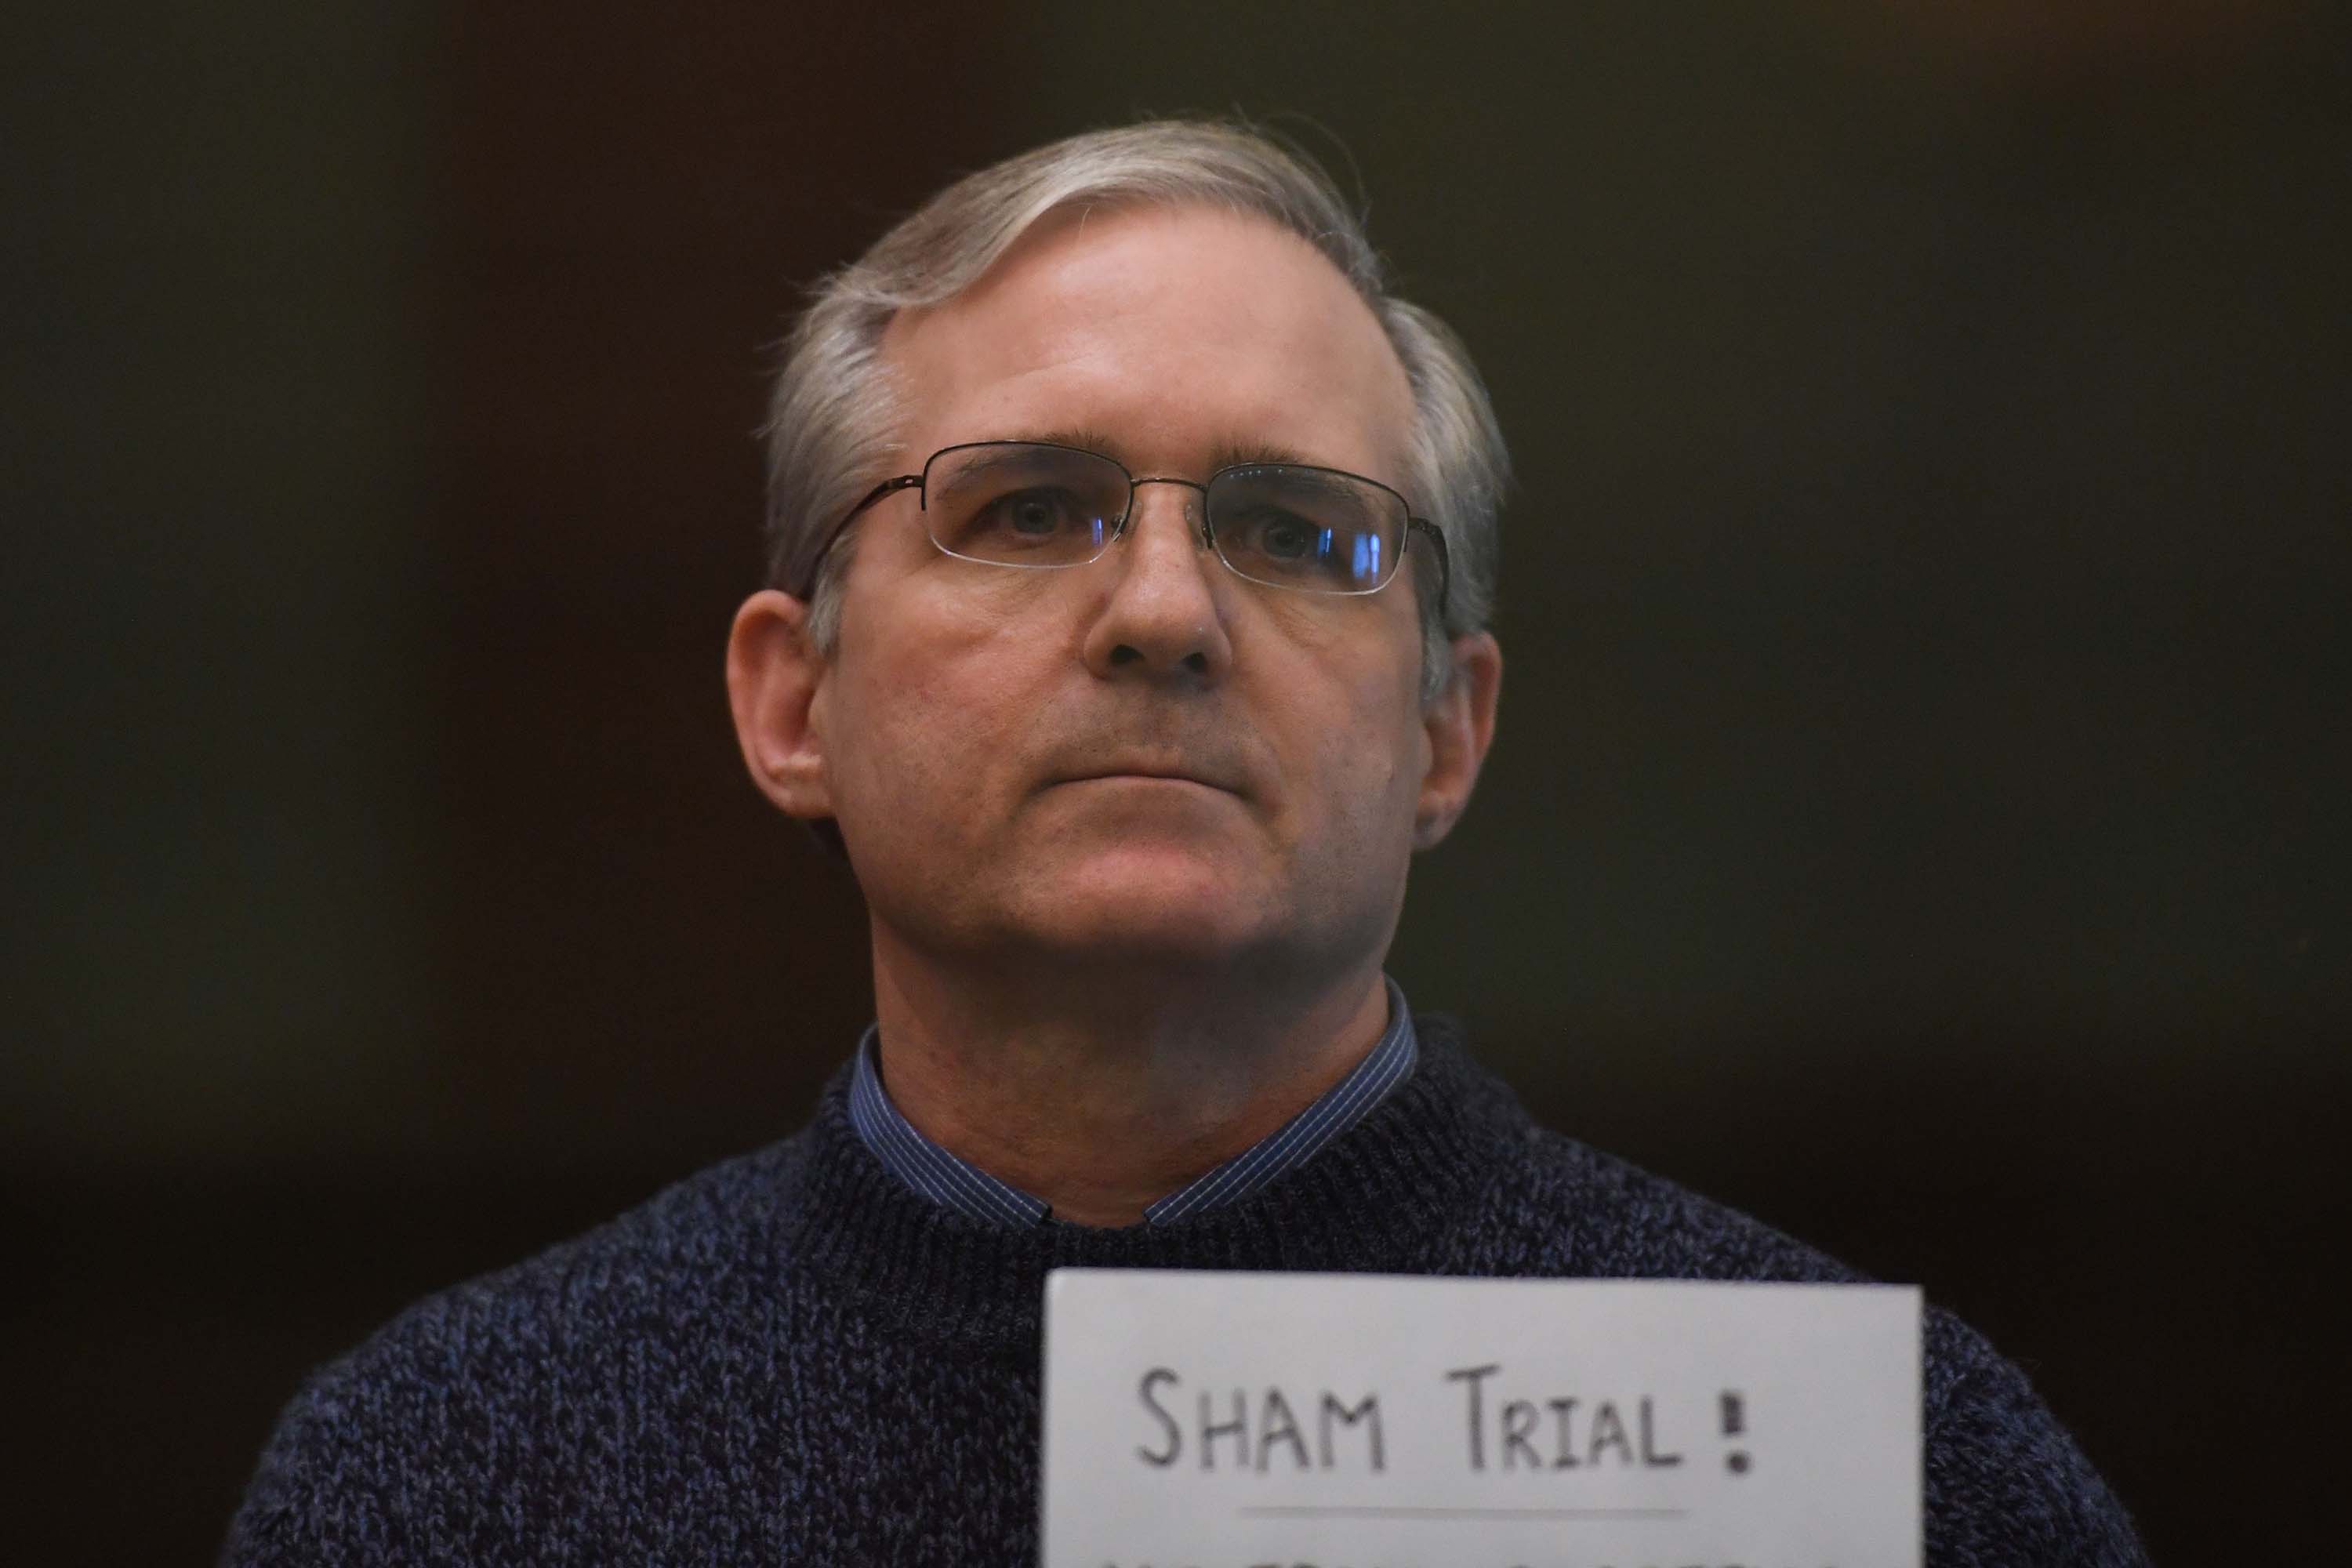 Paul Whelan, a former US marine accused of espionage and arrested in Russia in December 2018, stands inside a defendants' cage as he waits to hear his verdict in Moscow on June 15, 2020.